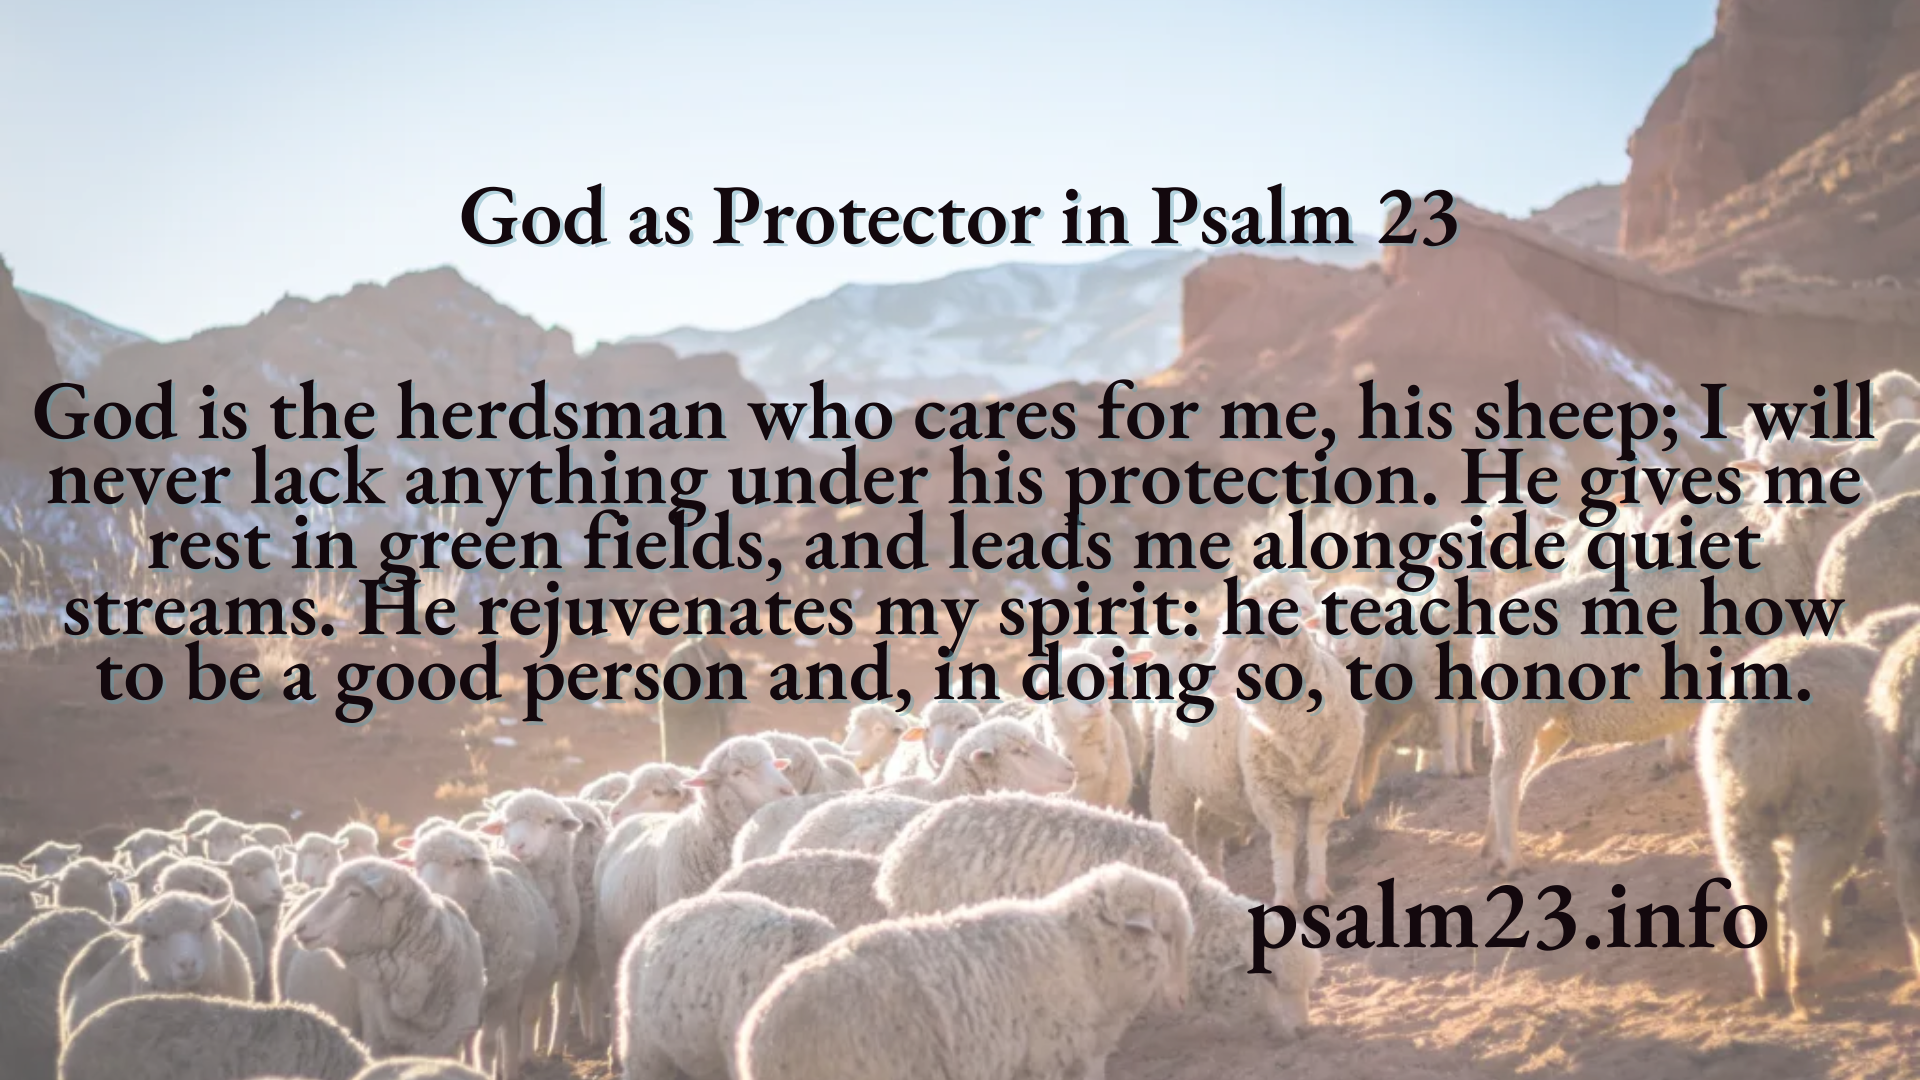 God as Protector in Psalm 23